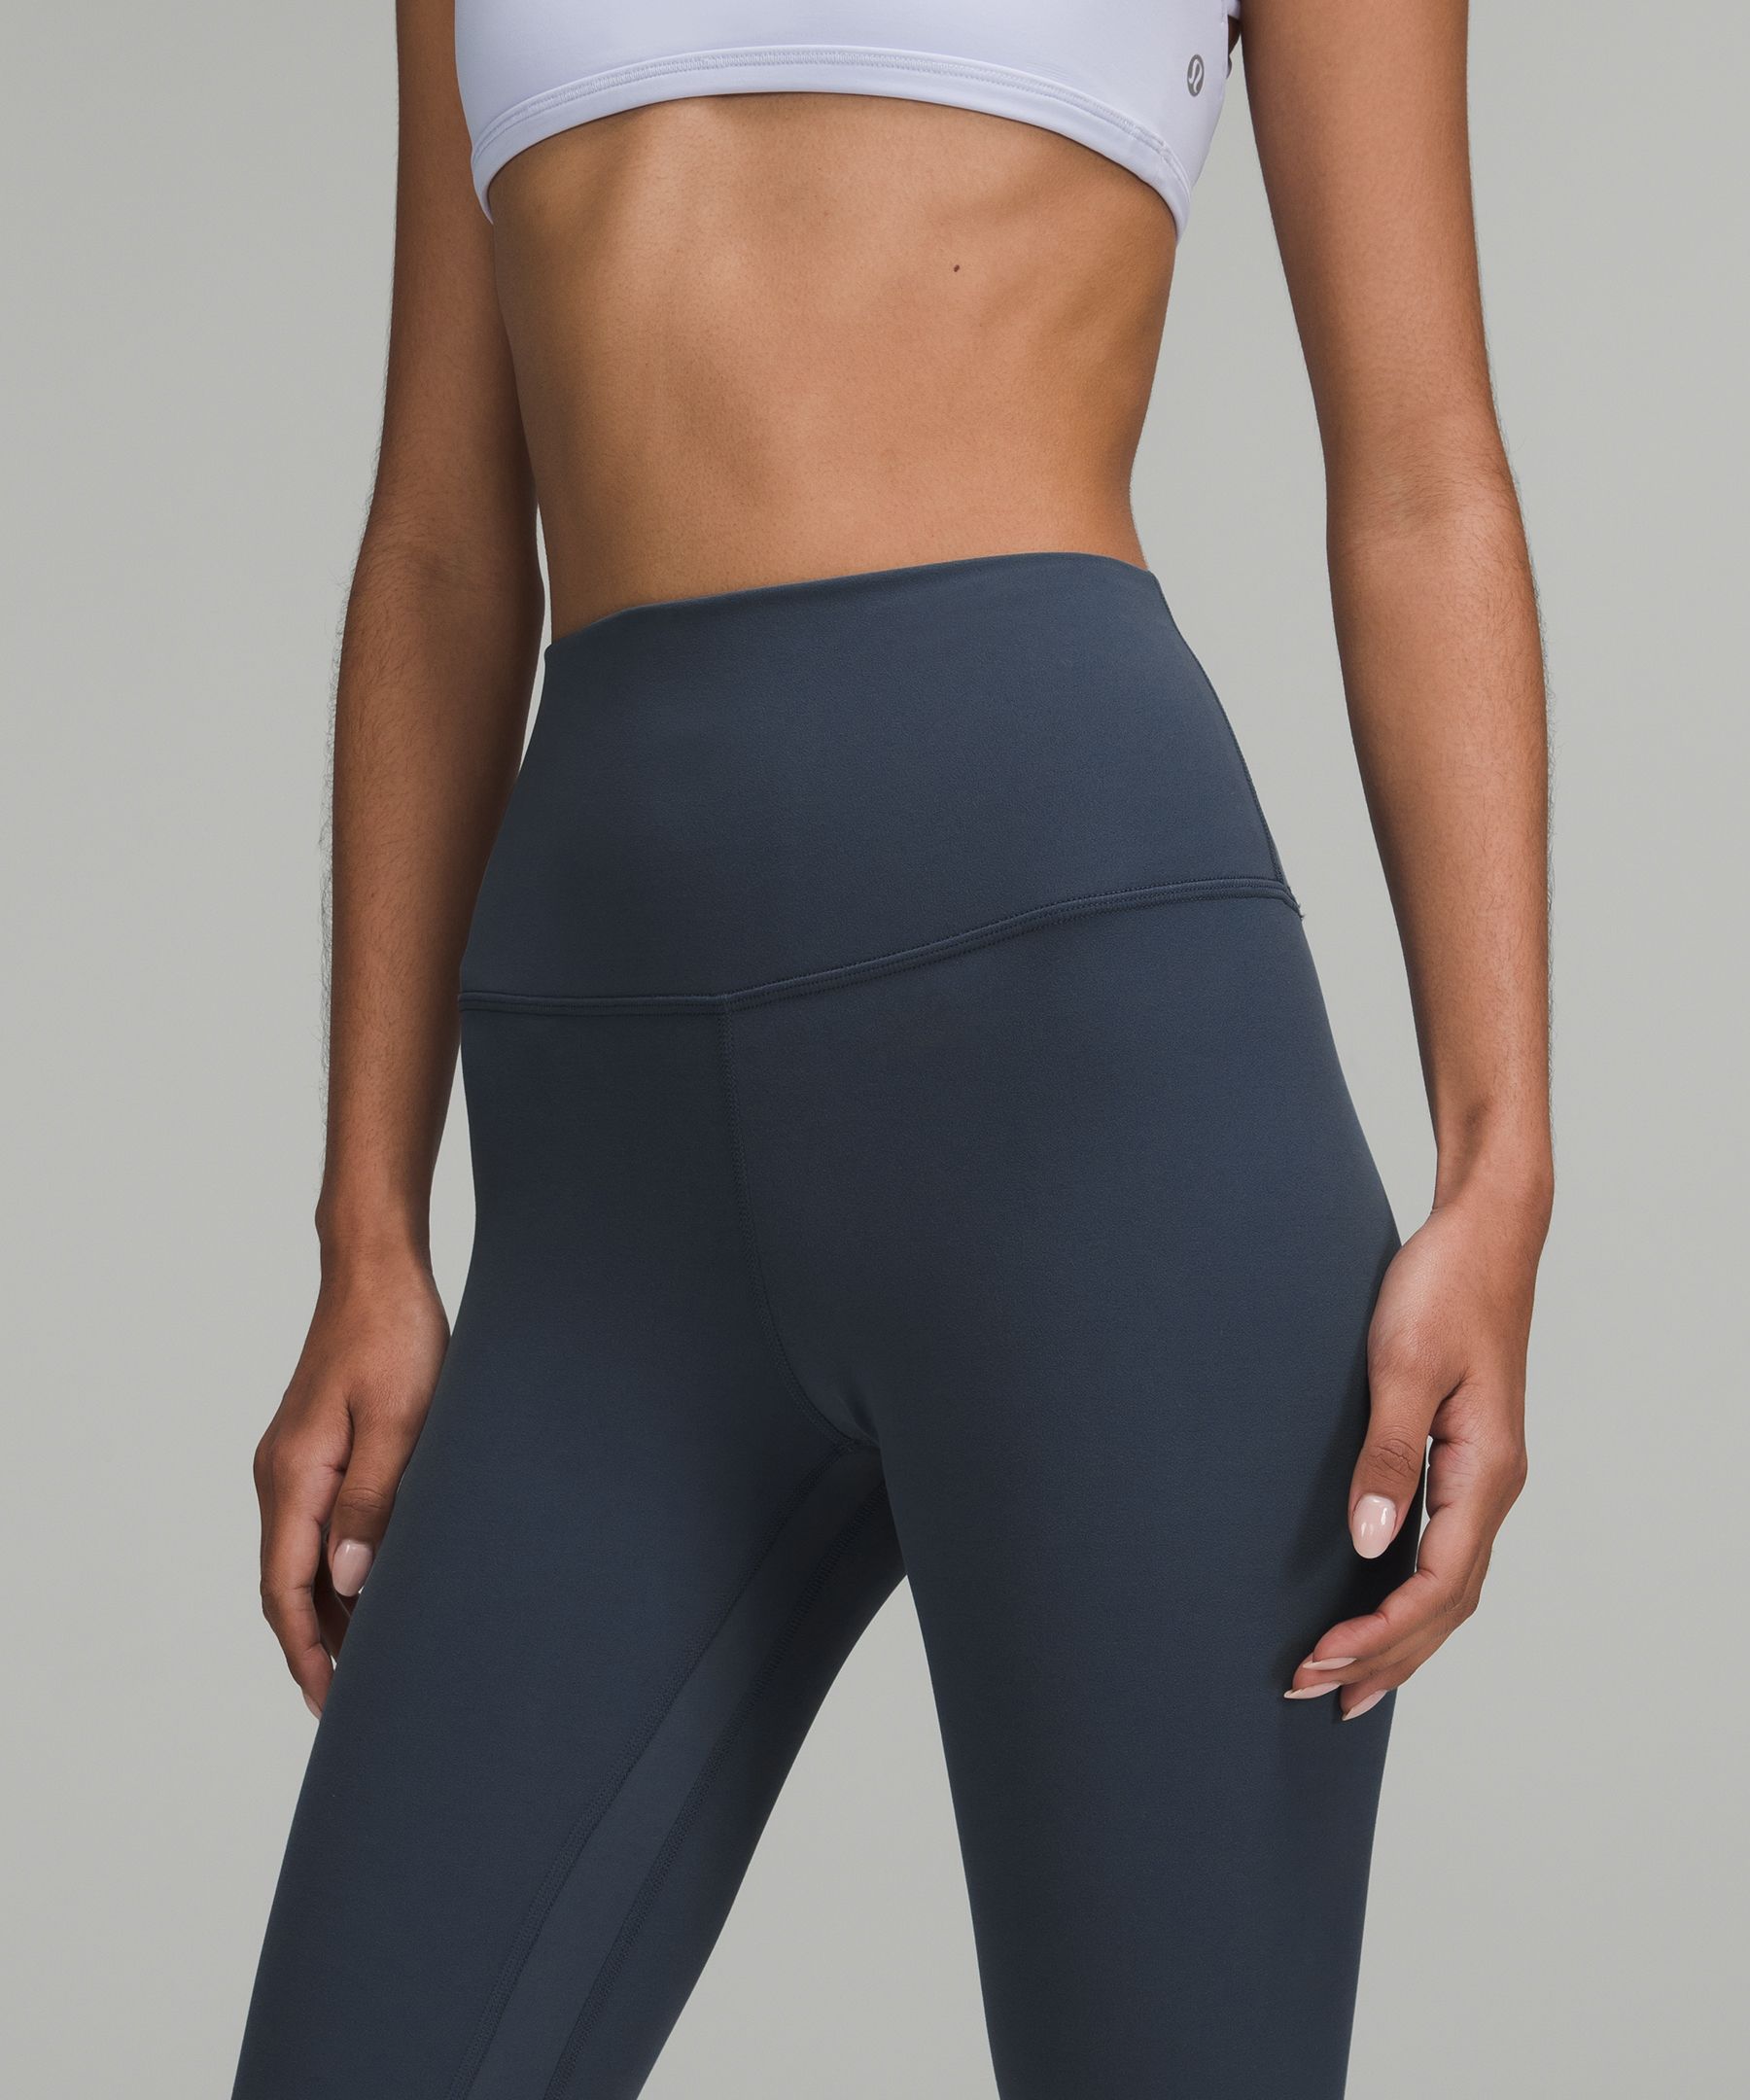 Lululemon Leggings Size 8 - $67 New With Tags - From Jaden